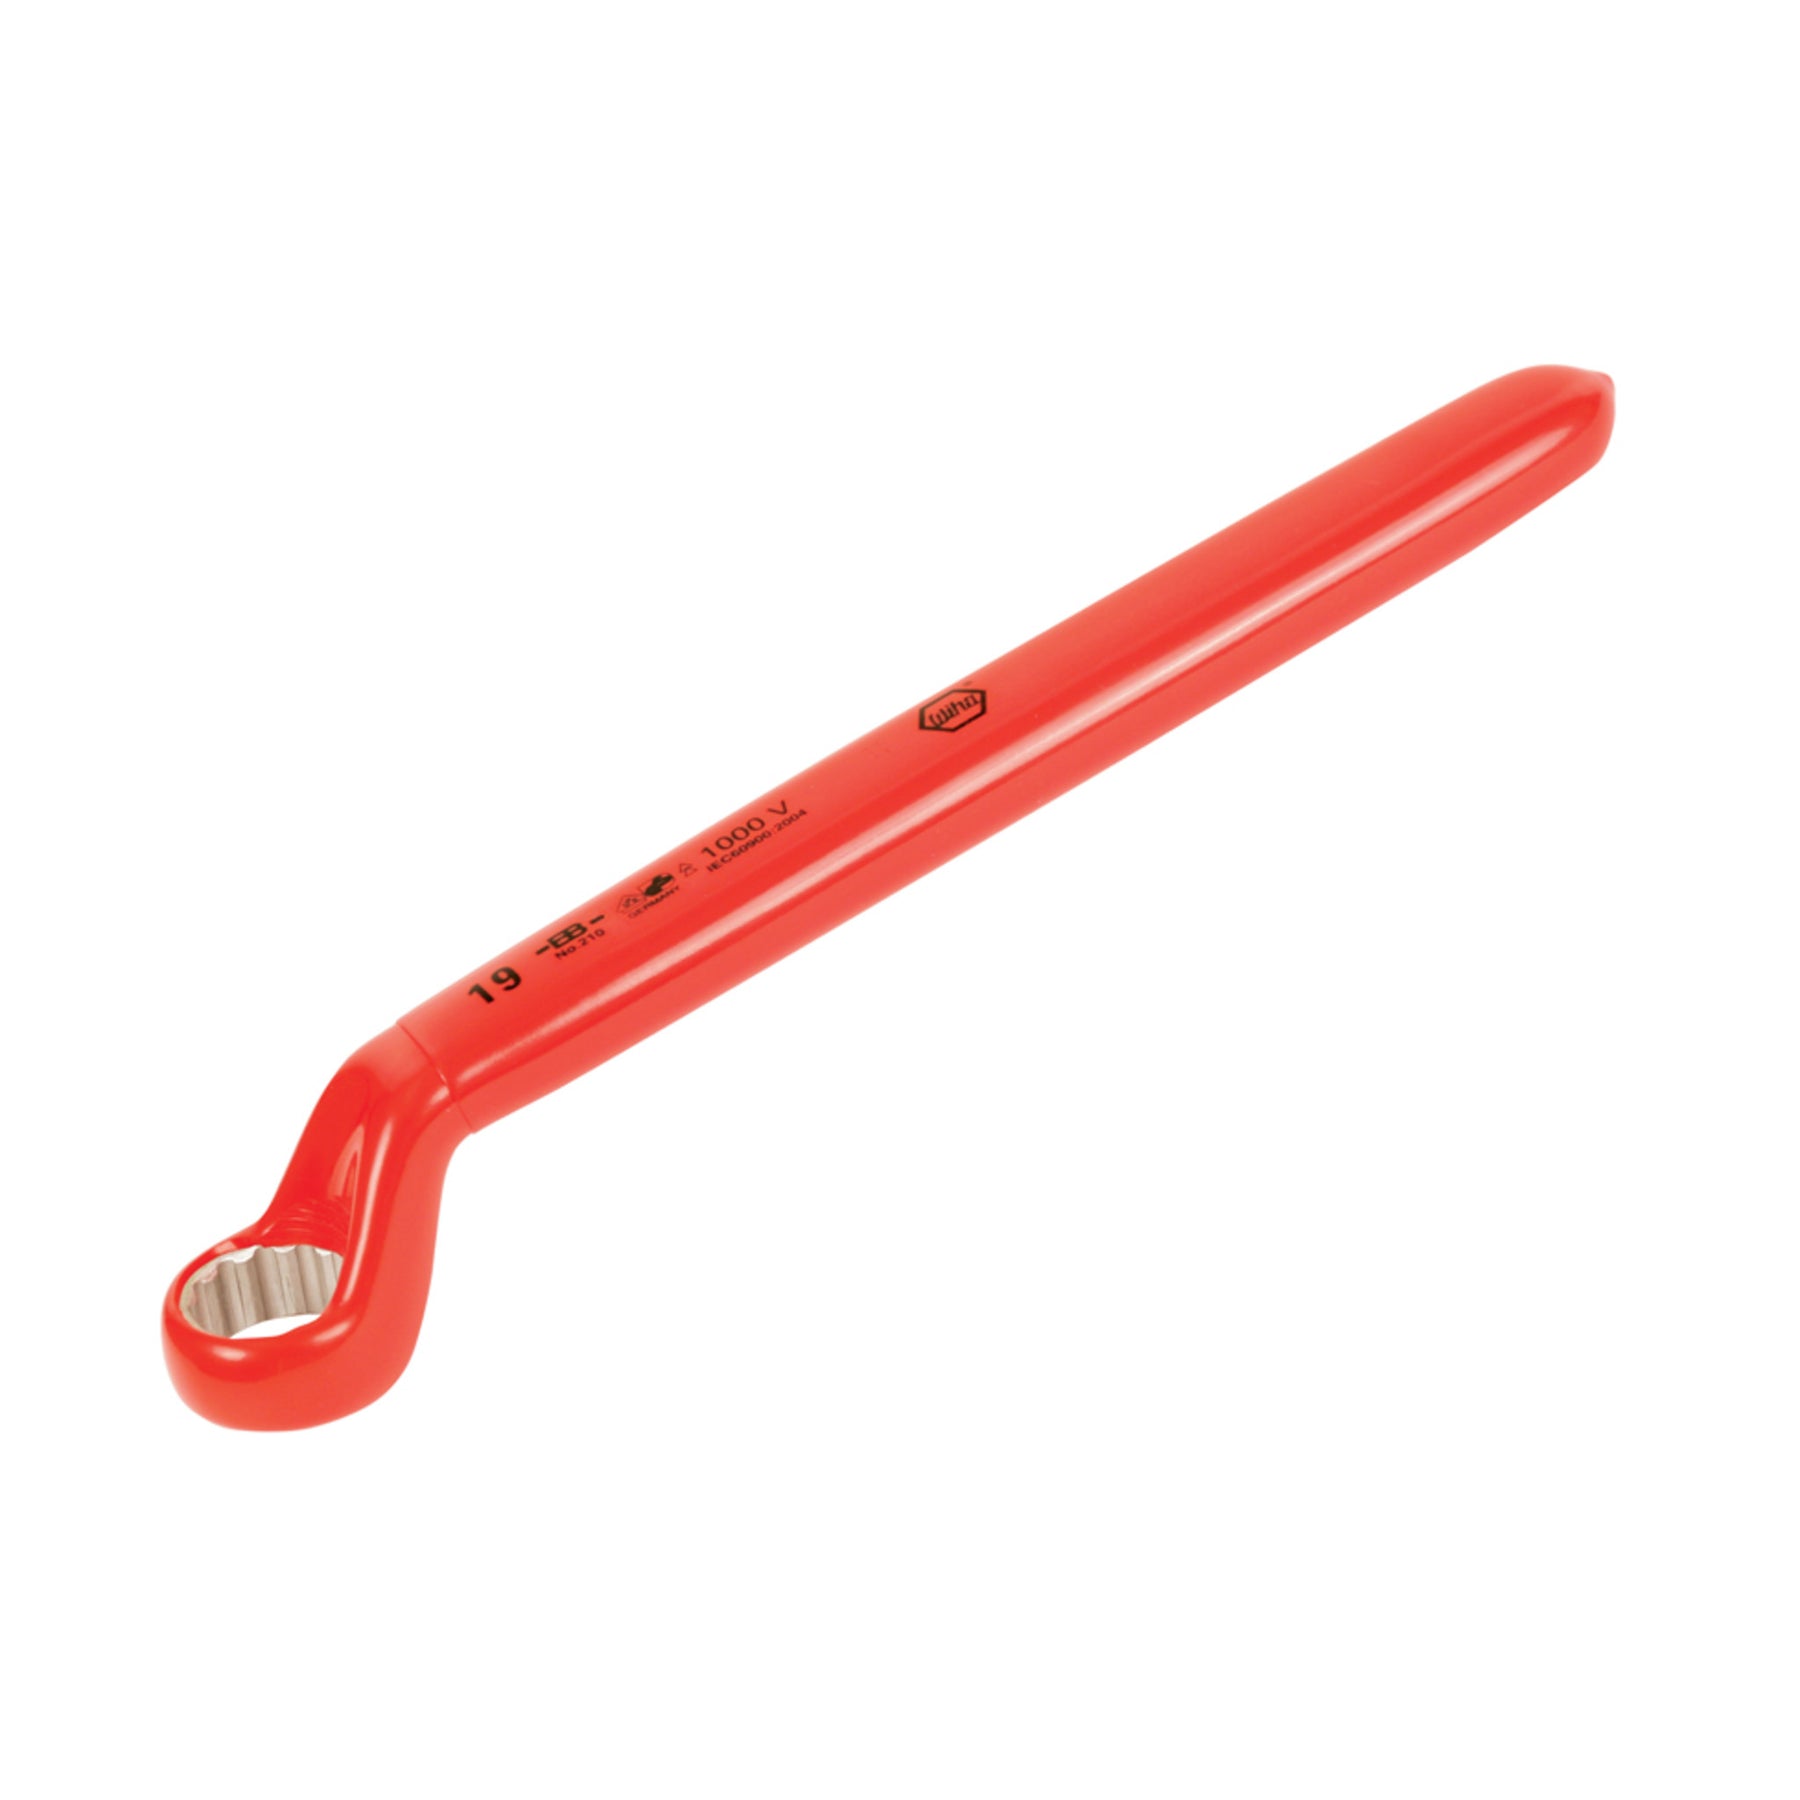 Insulated Deep Offset Wrench 11mm